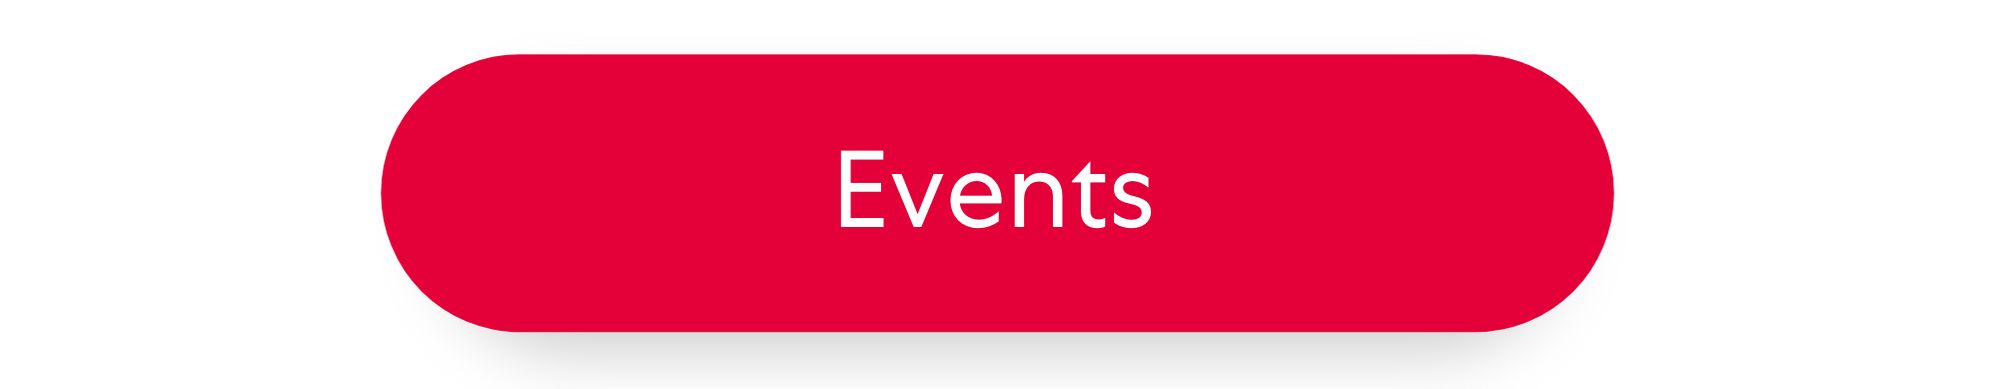 EVENTS-BUTTON-RED.png